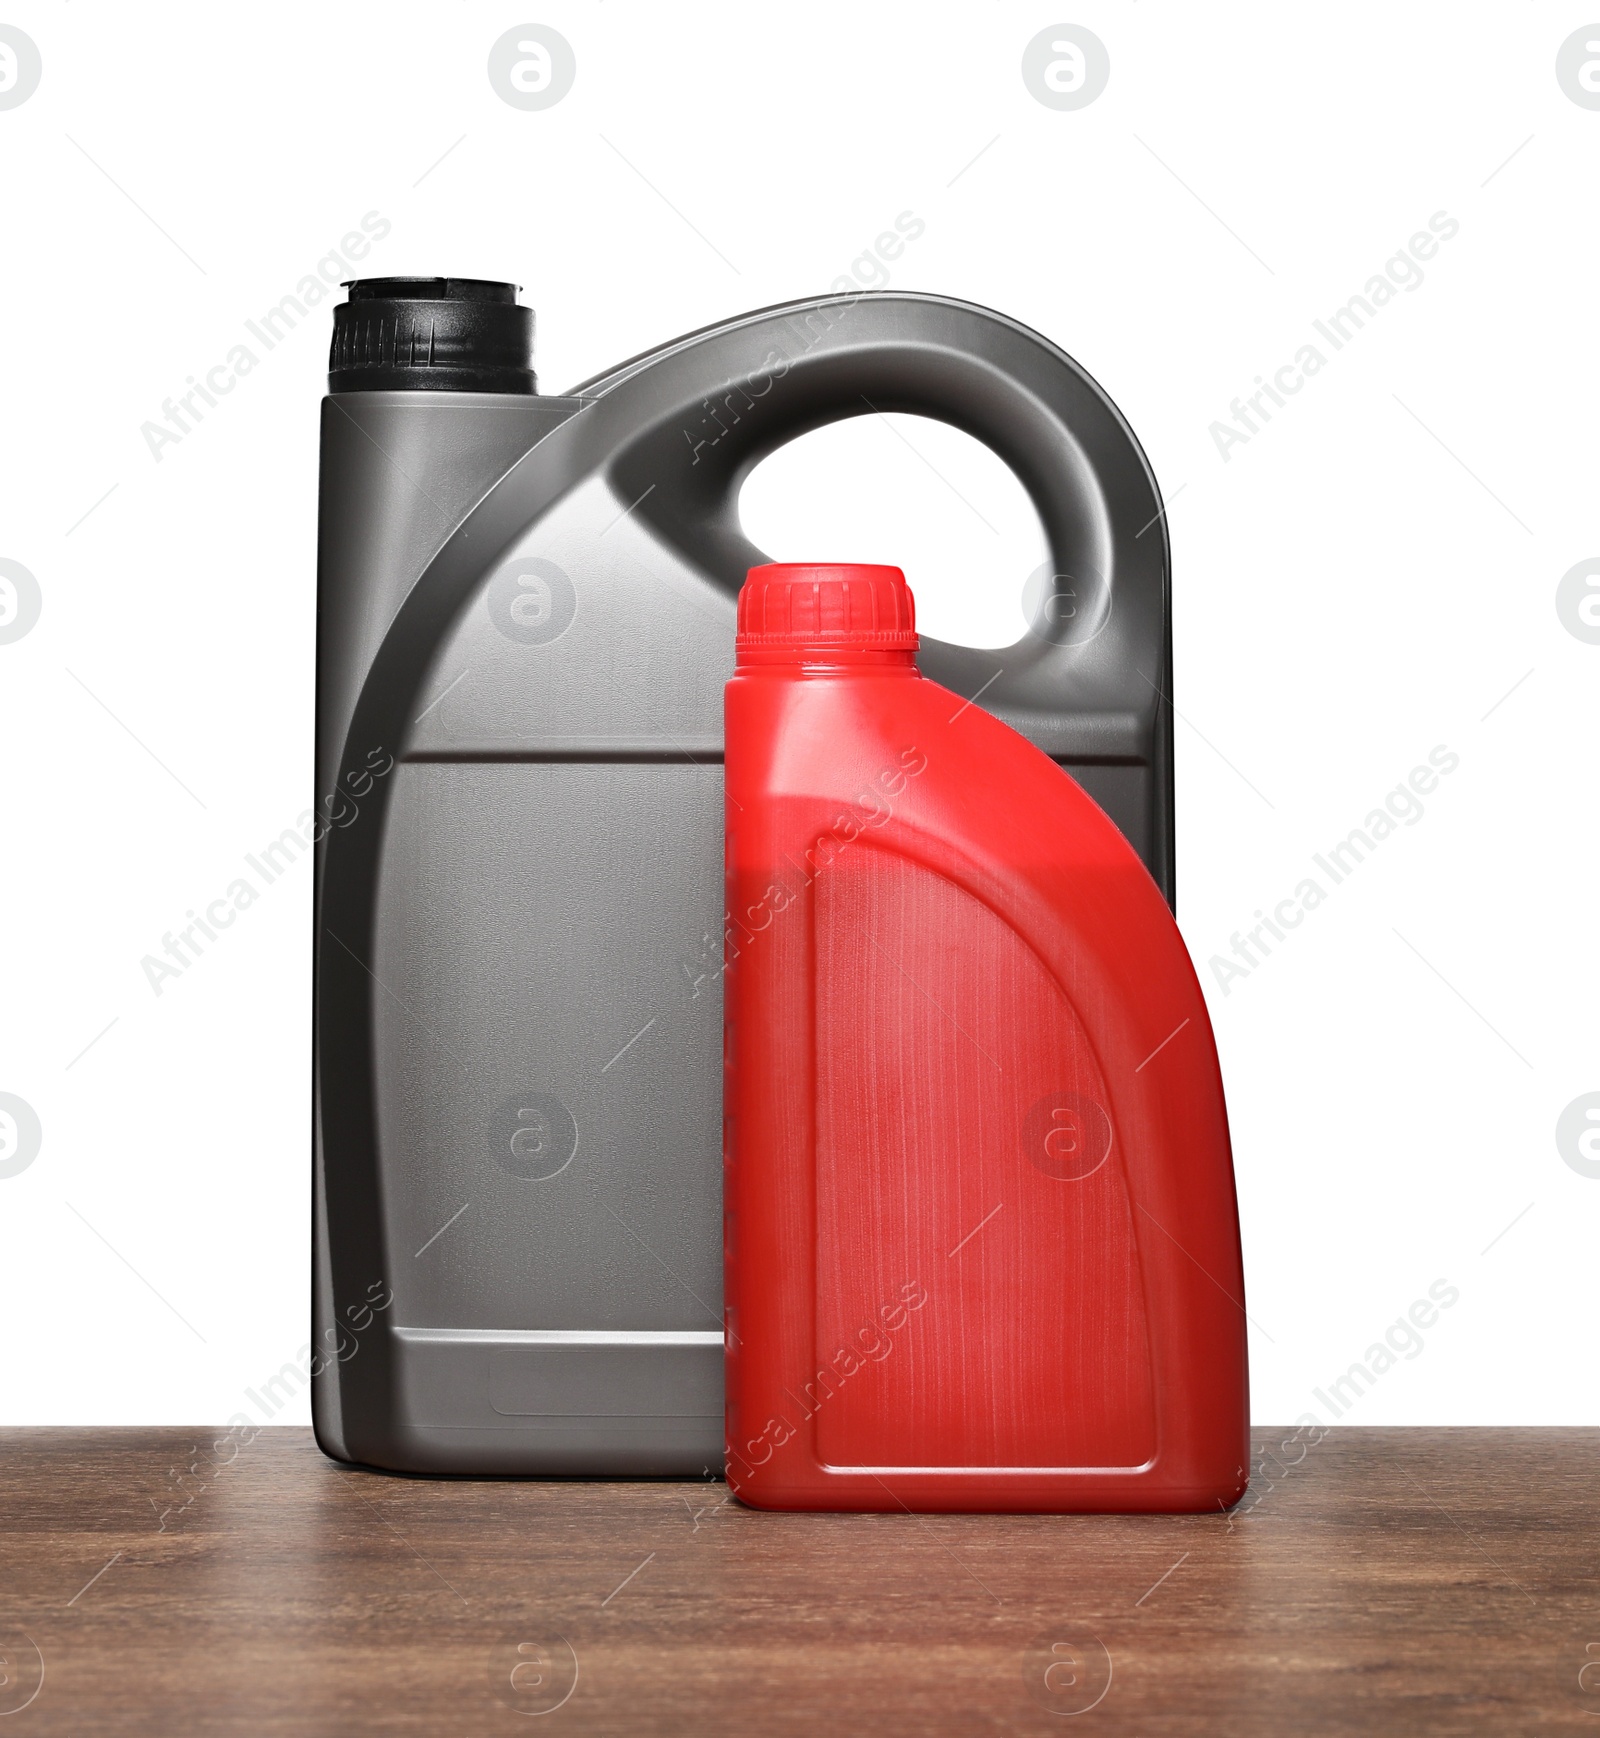 Photo of Motor oil in different containers on wooden table against white background